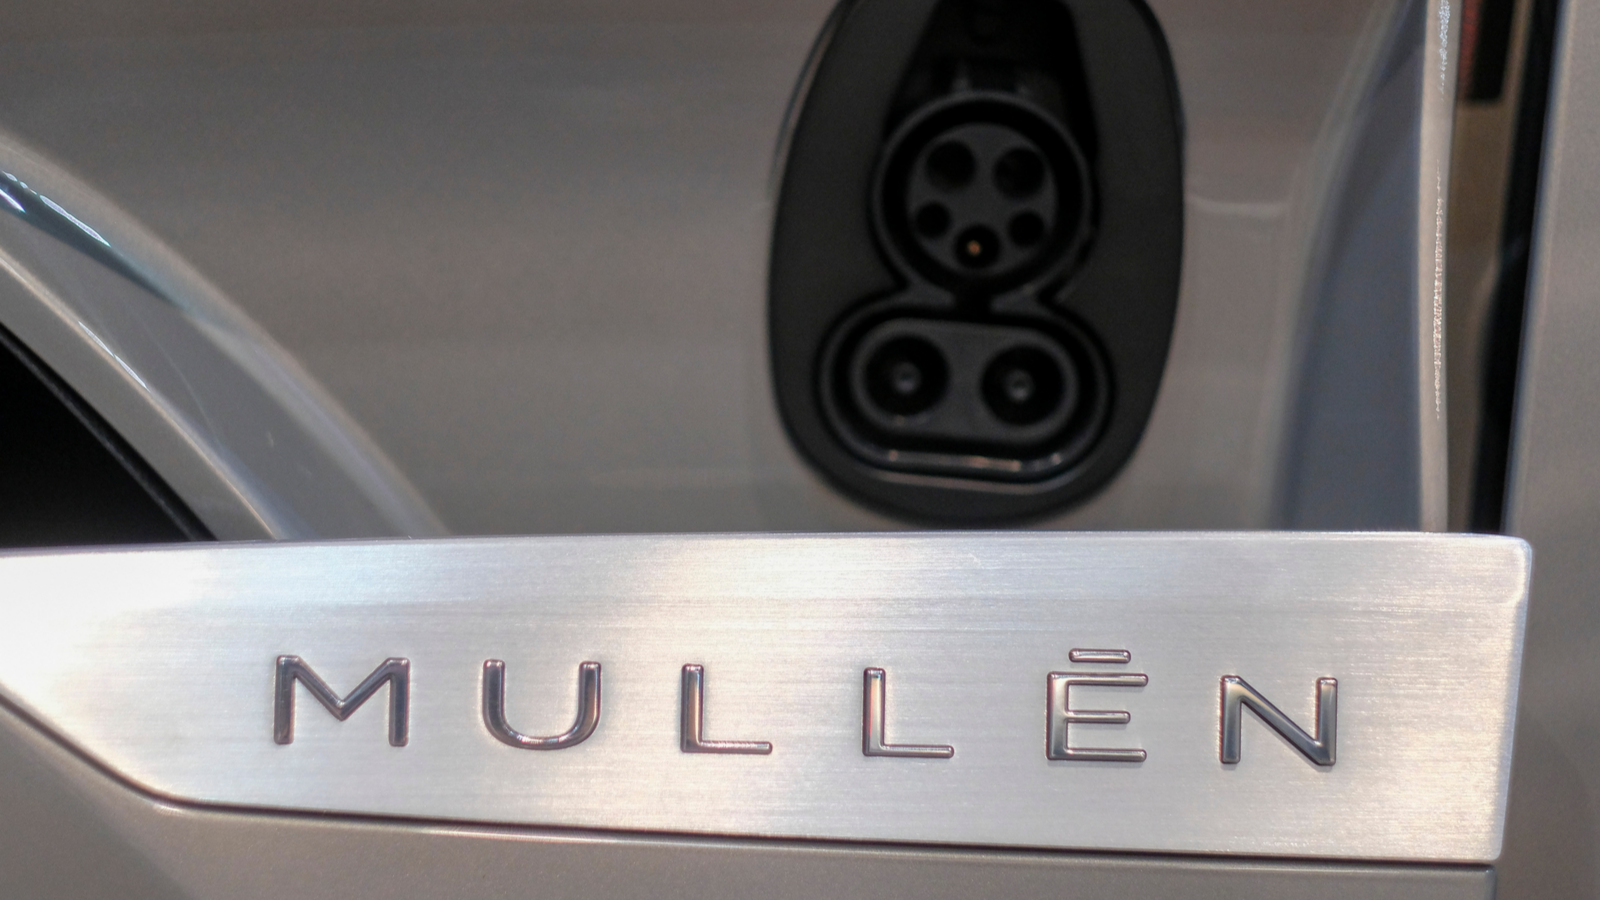 The Mullen (MULN Stock) Five vehicle is displayed at the 2021 LA Auto Show media day in Los Angeles, November, 18, 2021. MULN stock.